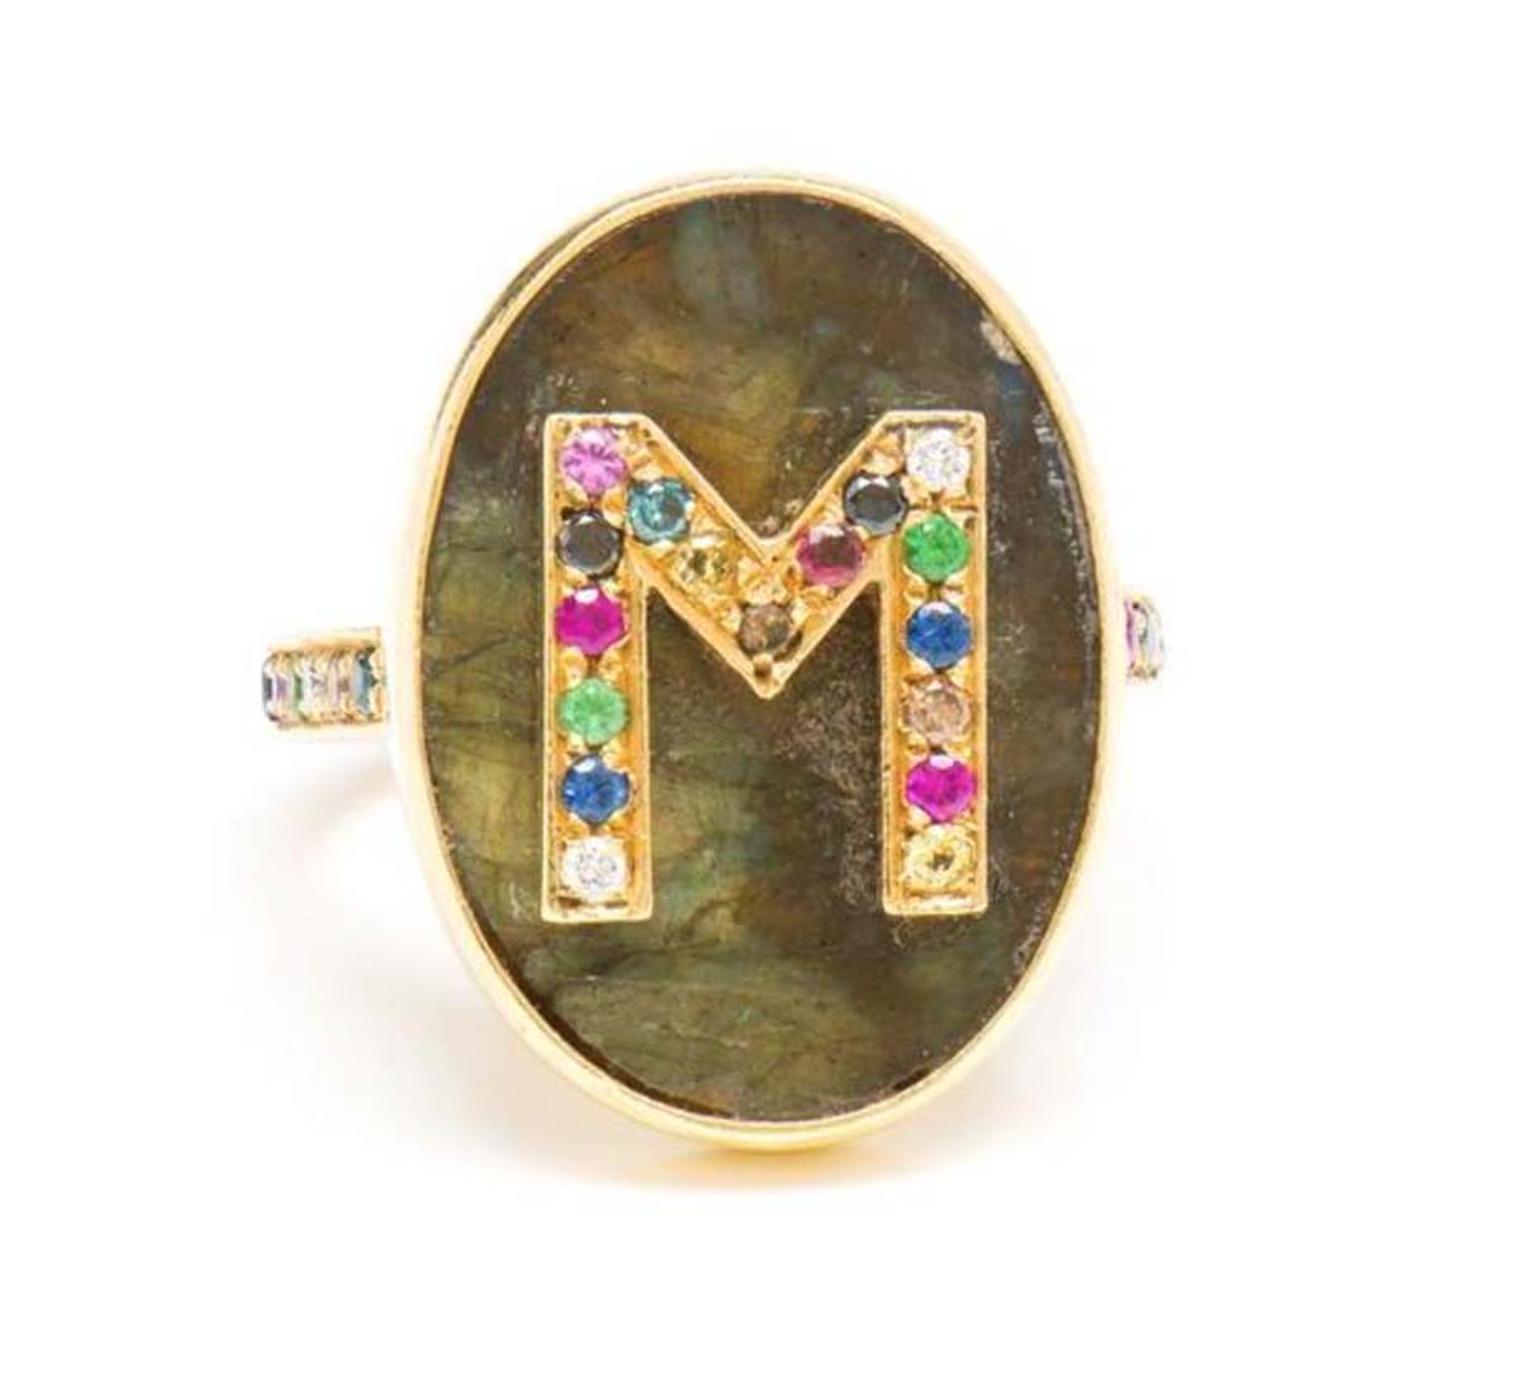 Personalised designer jewellery is a key trend for 2015, so spoil your mother with this bespoke Carolina Bucci high jewellery ring, featuring a gemstone-encrusted letter.